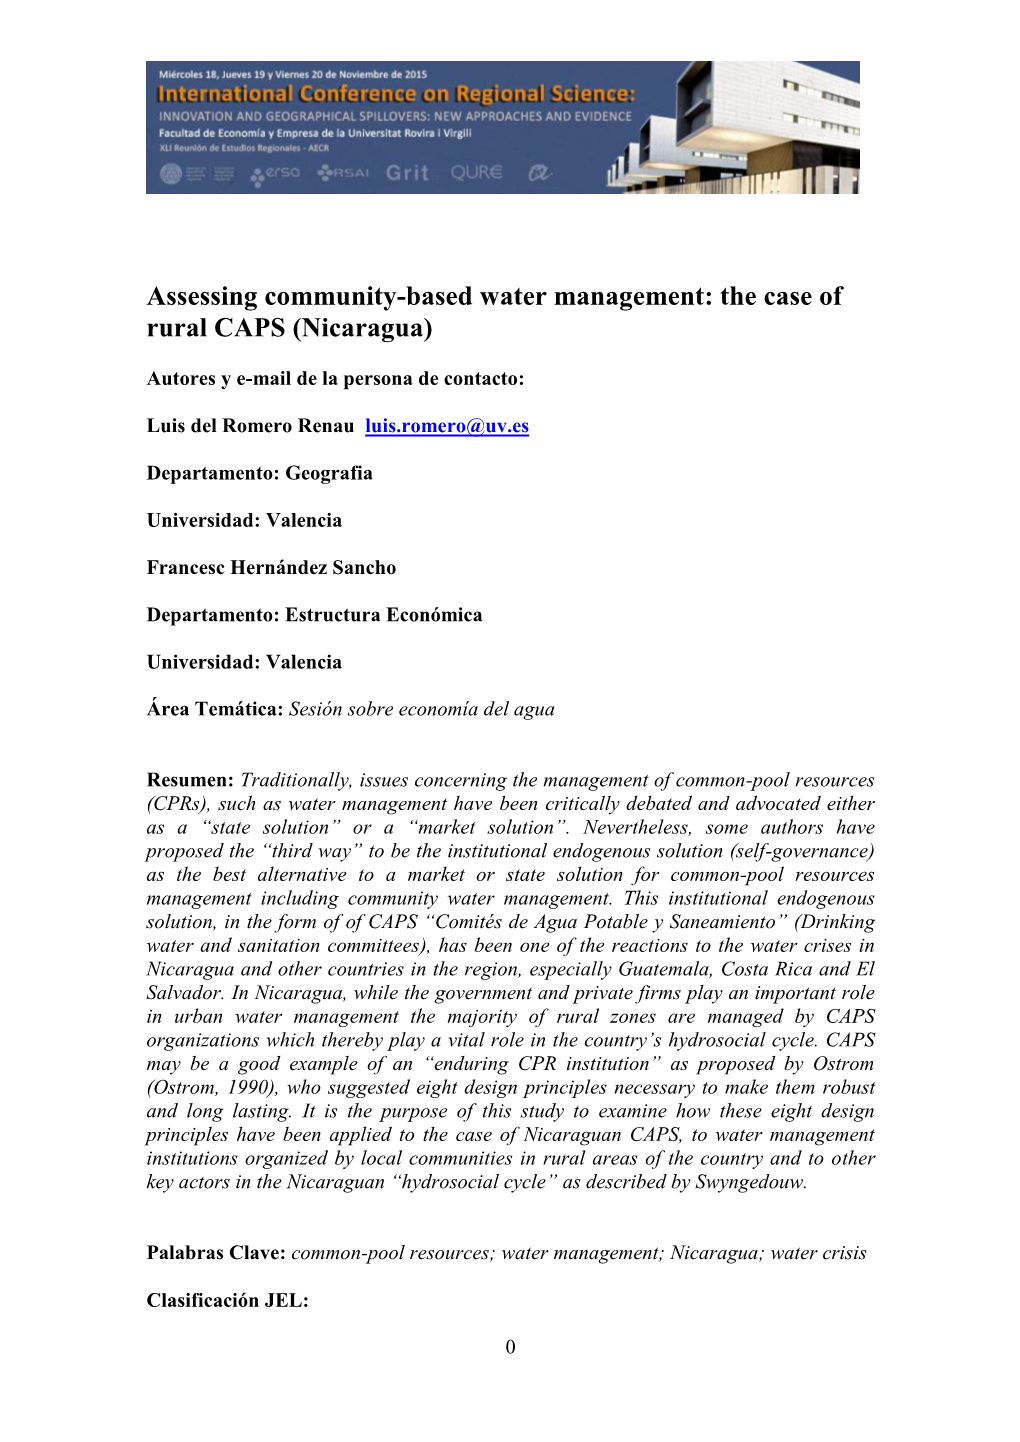 Assessing Community-Based Water Management: the Case of Rural CAPS (Nicaragua)